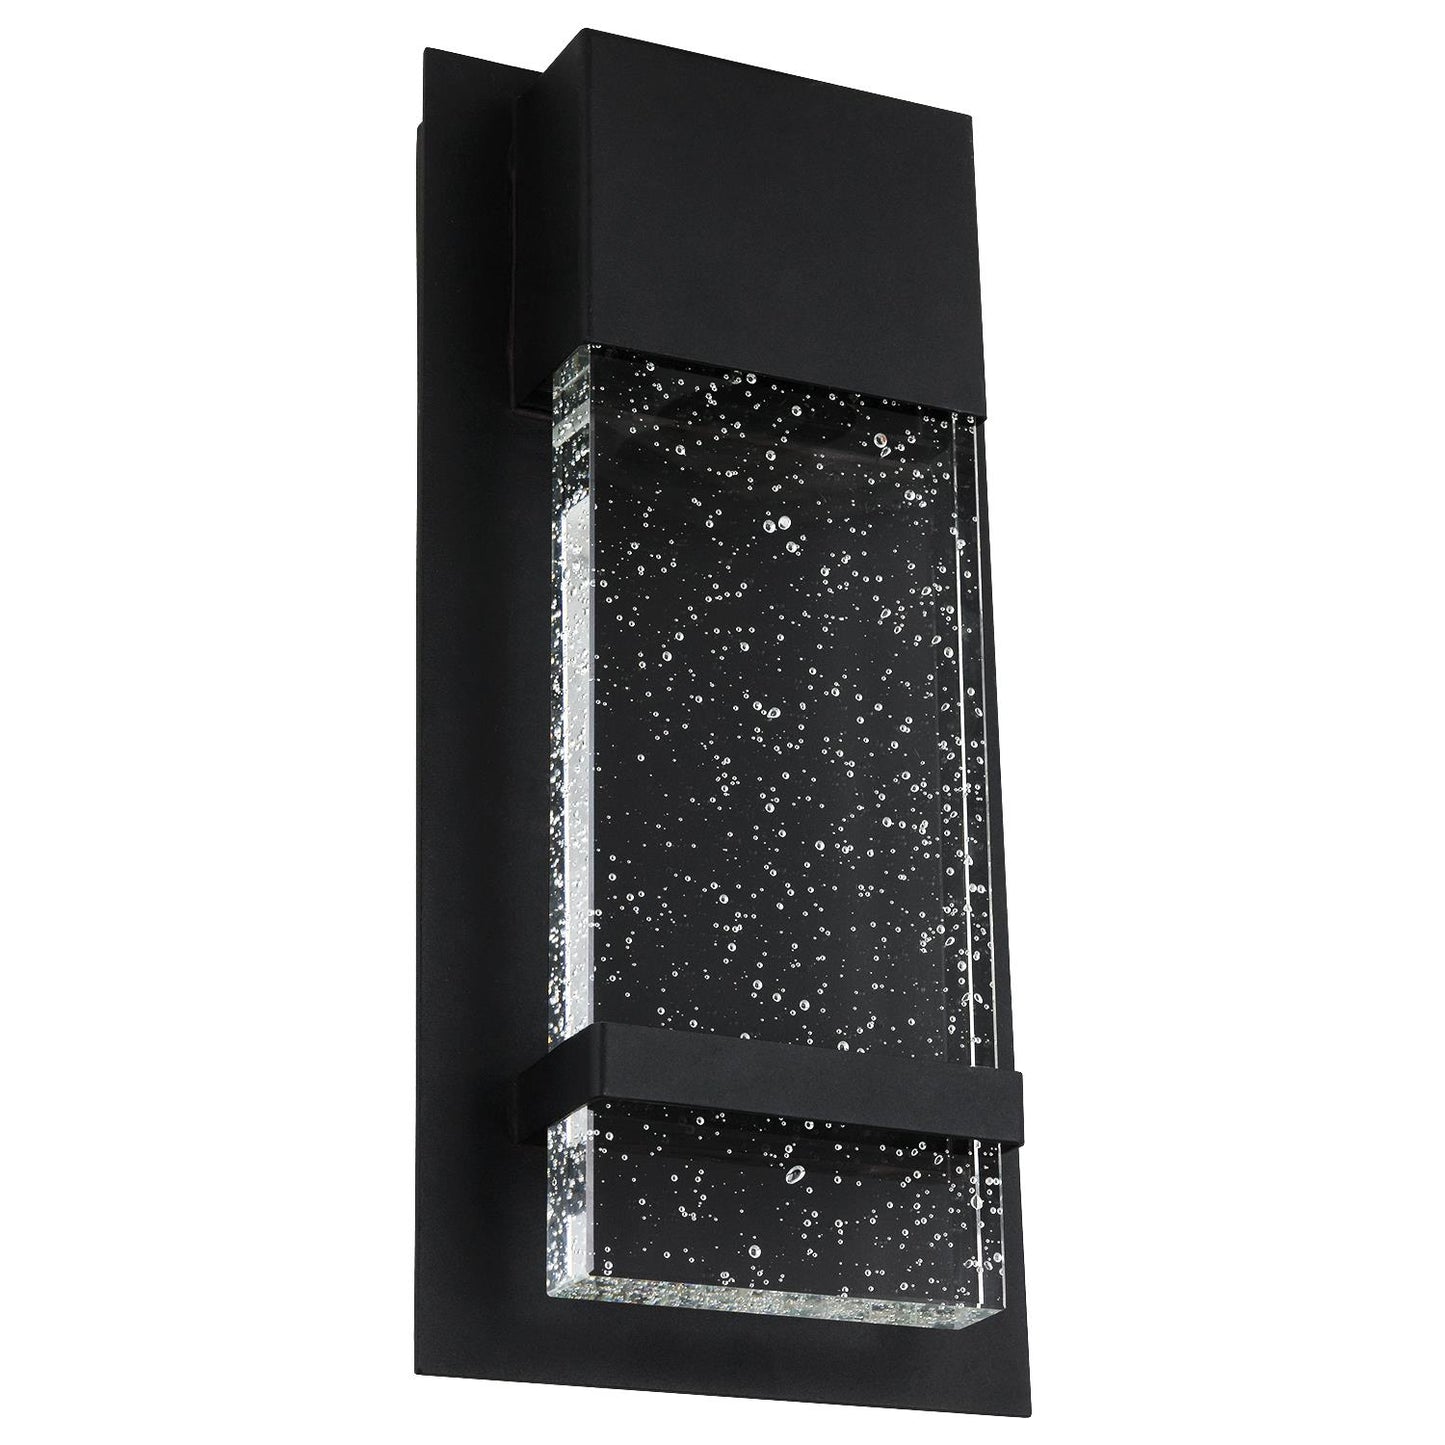 Sunlite LED Wall Sconce, Black Metal Frame with Raindrop Effect Glass Panel,  6.5" Wide, 5000K Super White, Indoor & Outdoor, ADA Compliant